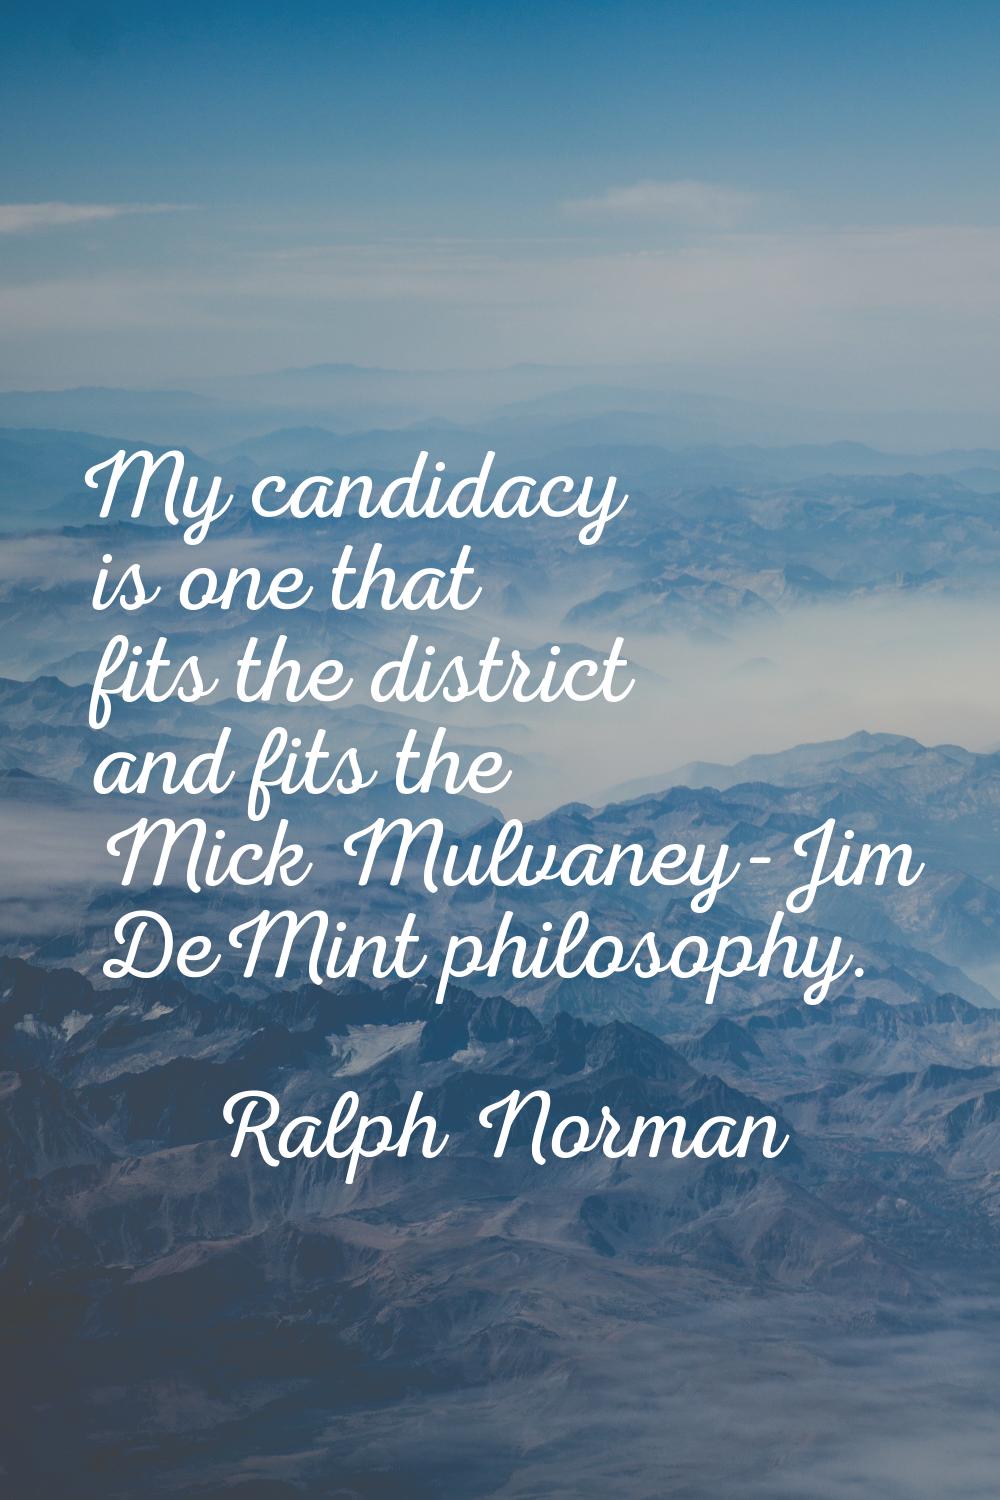 My candidacy is one that fits the district and fits the Mick Mulvaney-Jim DeMint philosophy.